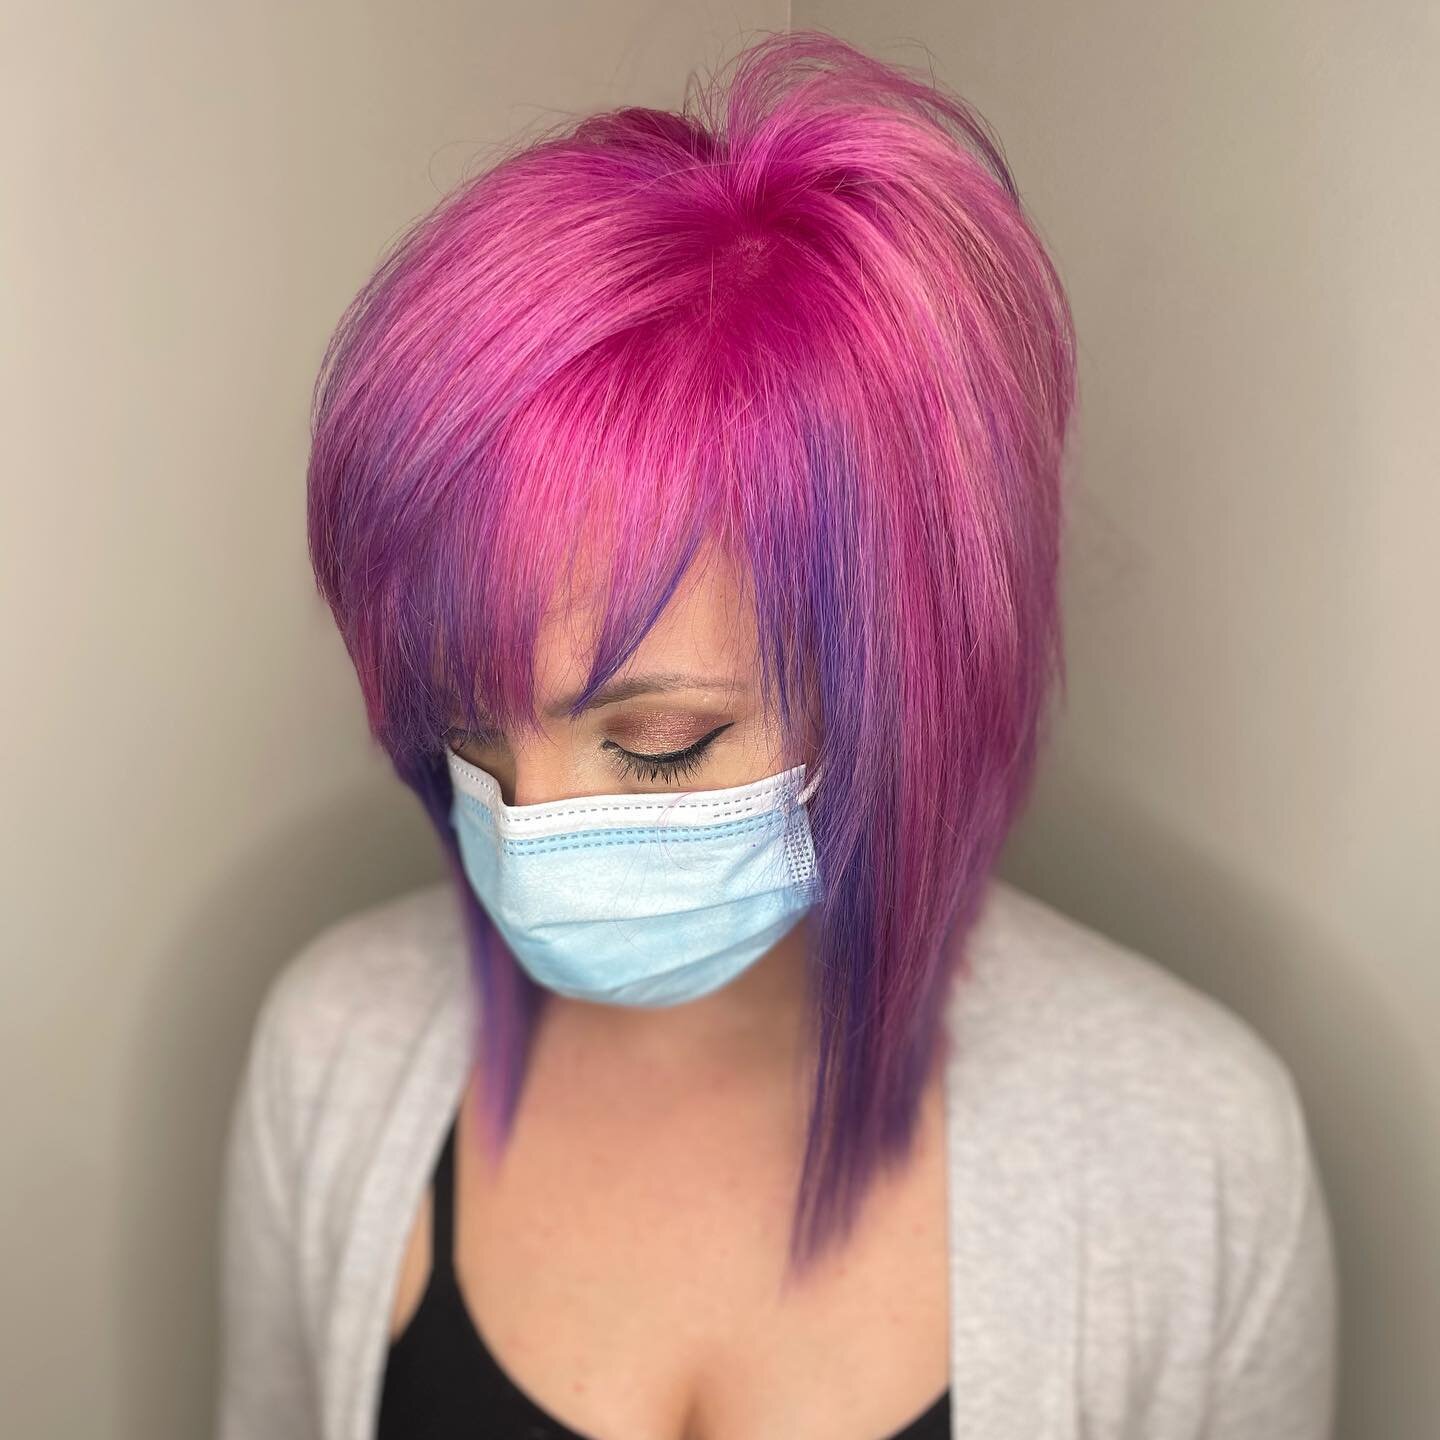 Living for this #shaghaircut and bright color by Mary! 🦩☂️💫@pulpriothair  #raleighhairstylist #raleighhairsalon #caryhairsalon #haircut #haircolor